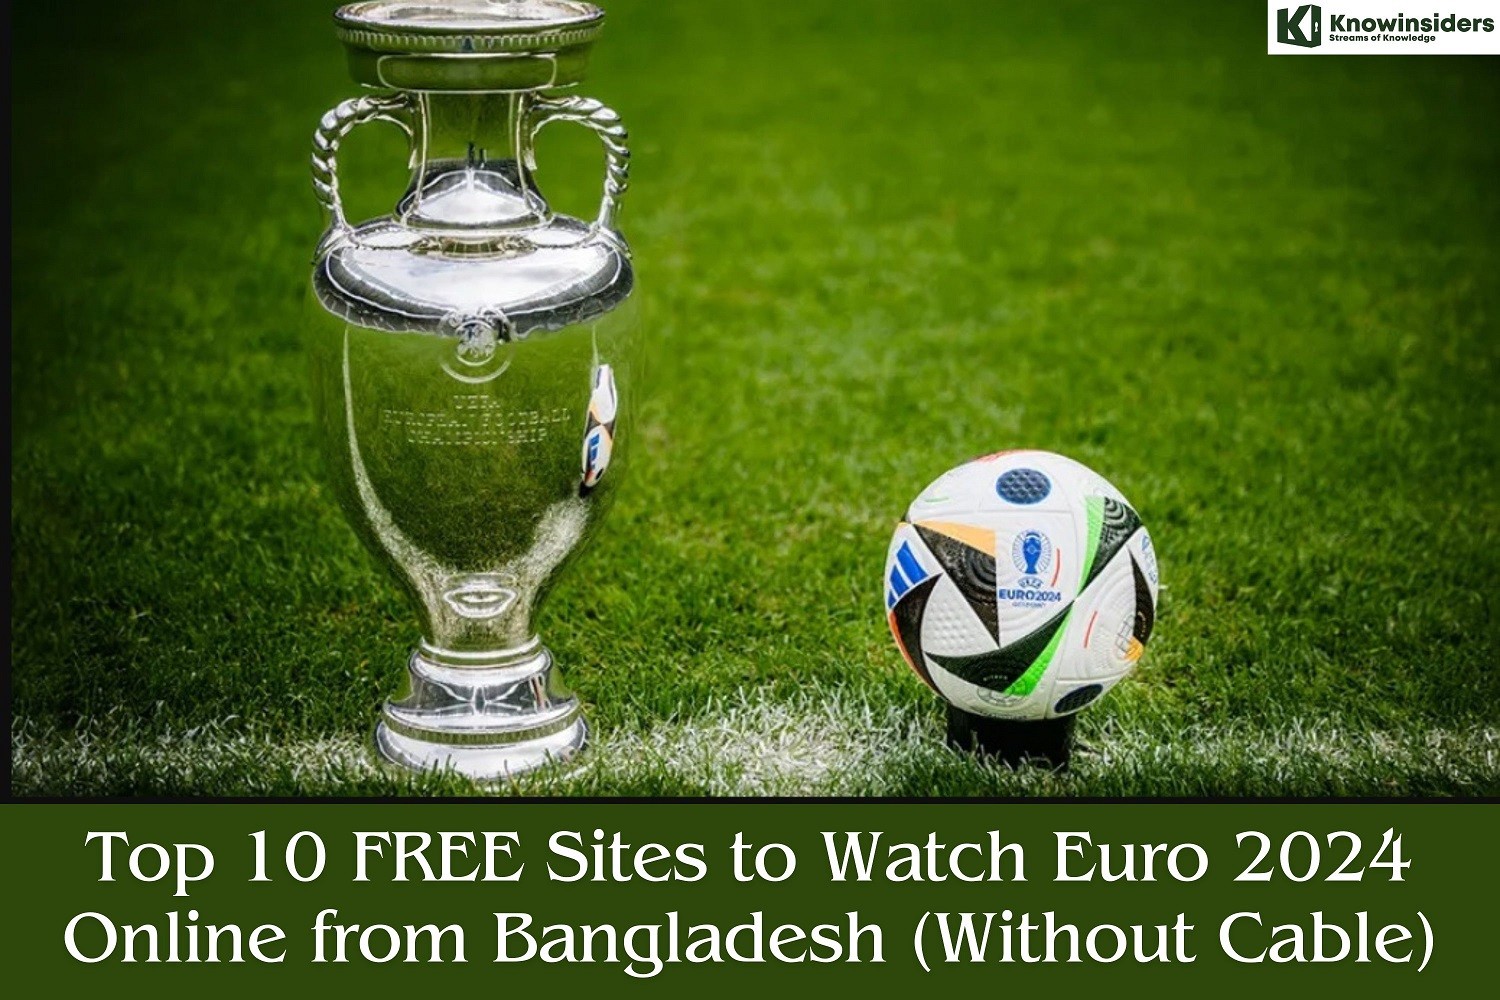 Top 10 FREE Sites to Watch Euro 2024 Live in Bangladesh (Without Cable